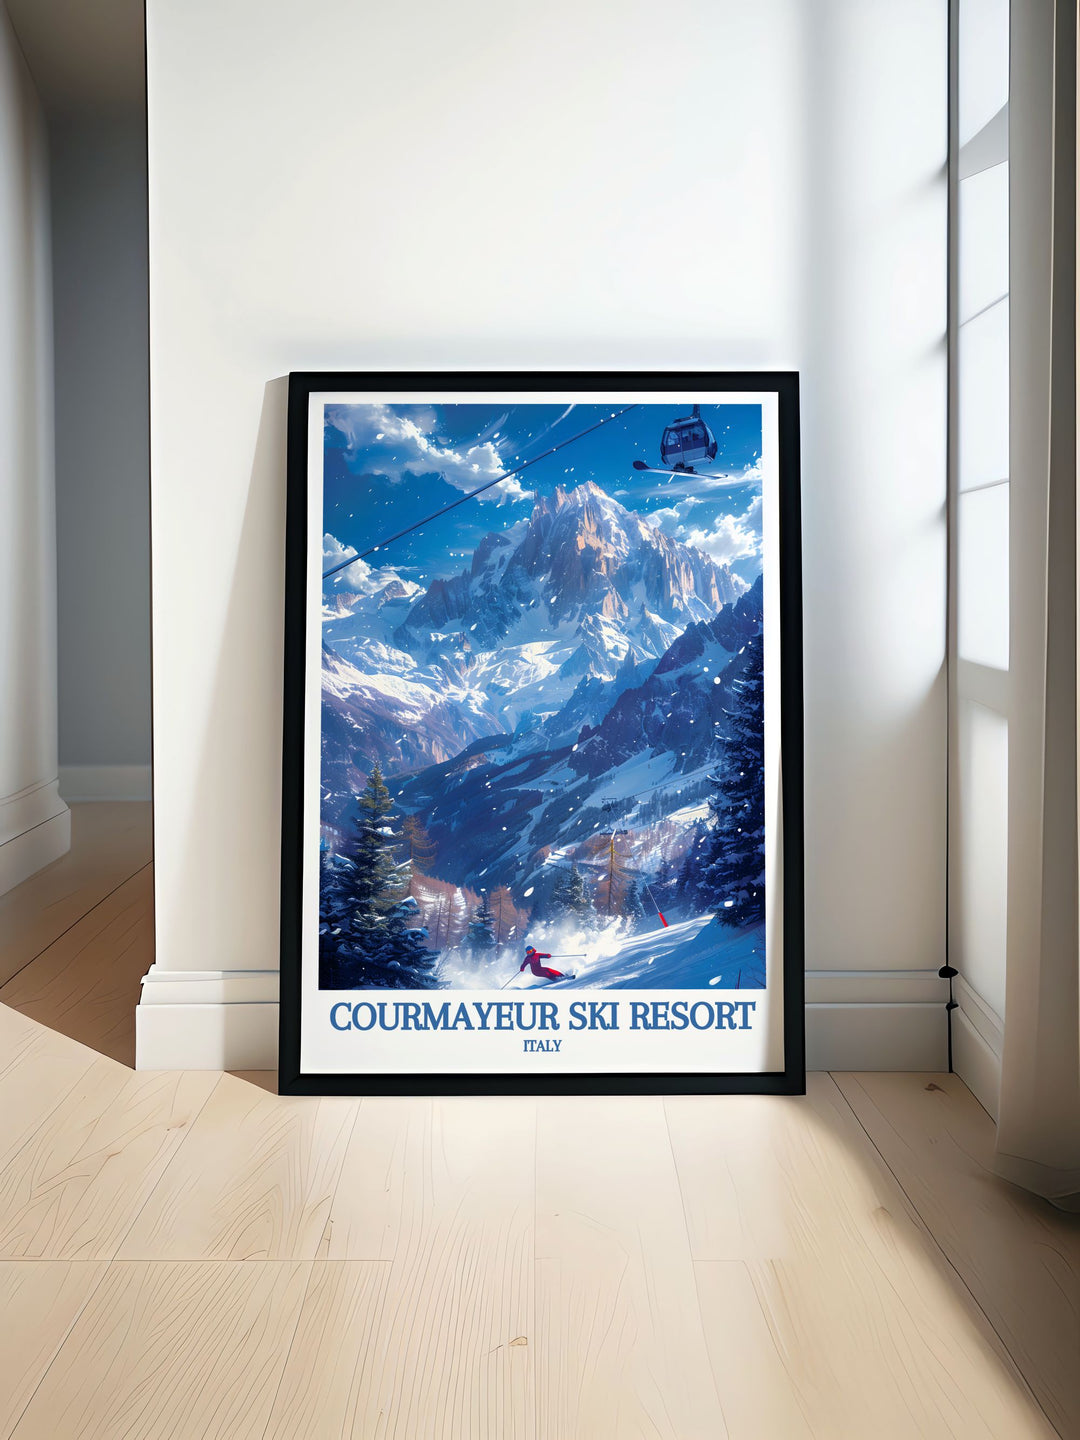 Featuring breathtaking views of Courmayeur Ski Resort and the iconic Mont Blanc, this poster is perfect for those who wish to bring a piece of Italys natural splendor and skiing culture into their home.